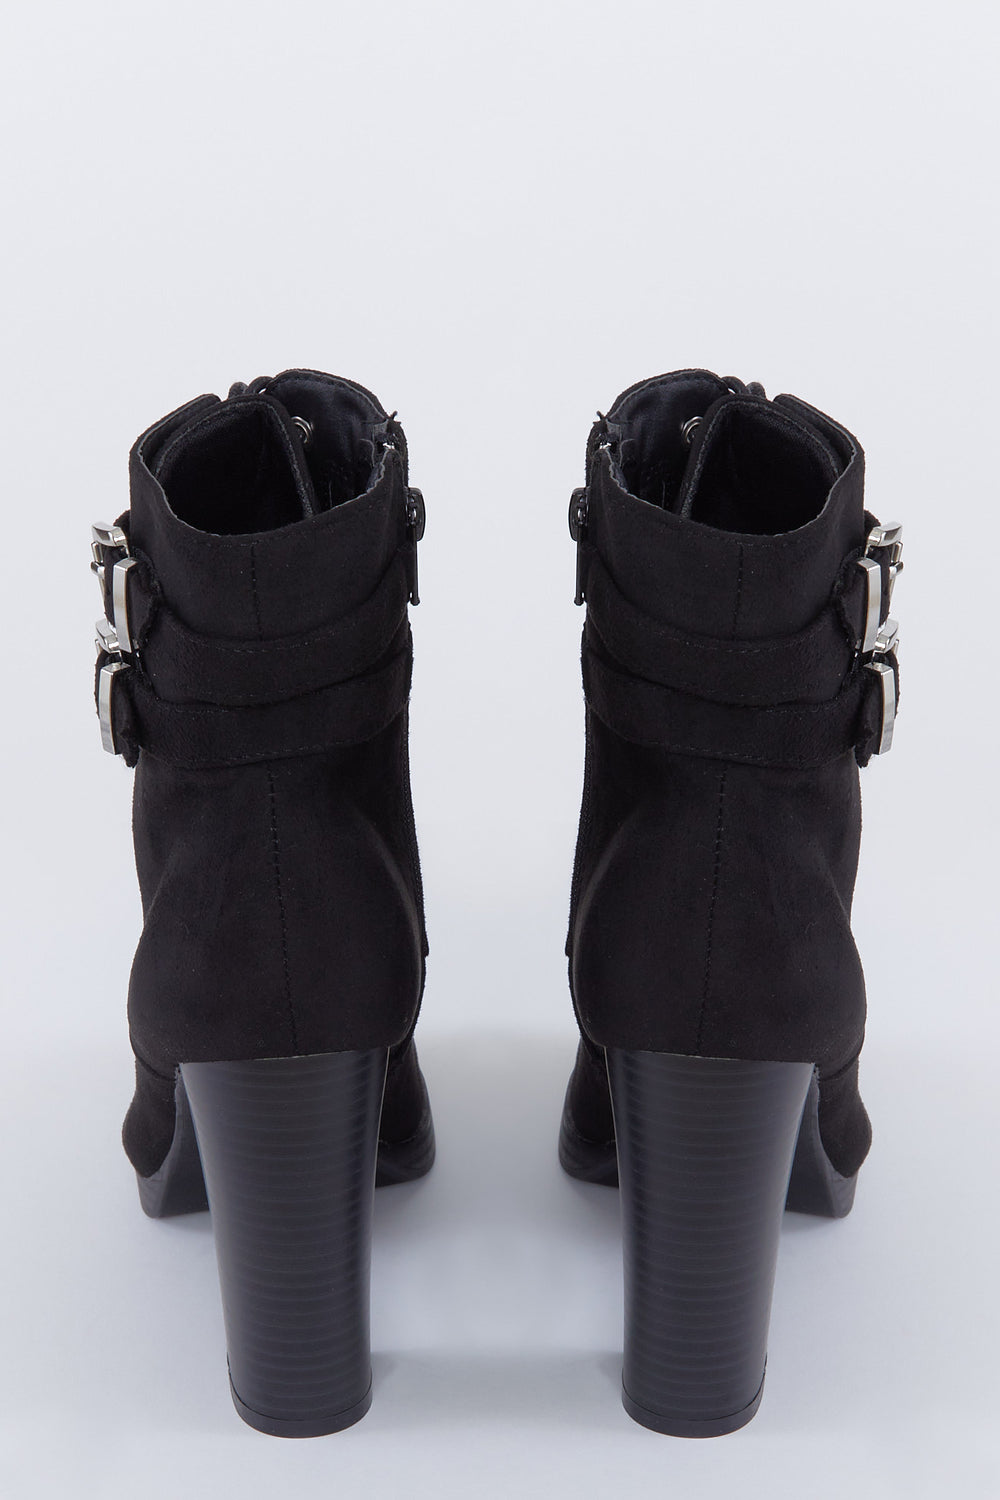 Faux-Suede Lace-Up Buckle Block Heel Boot Black